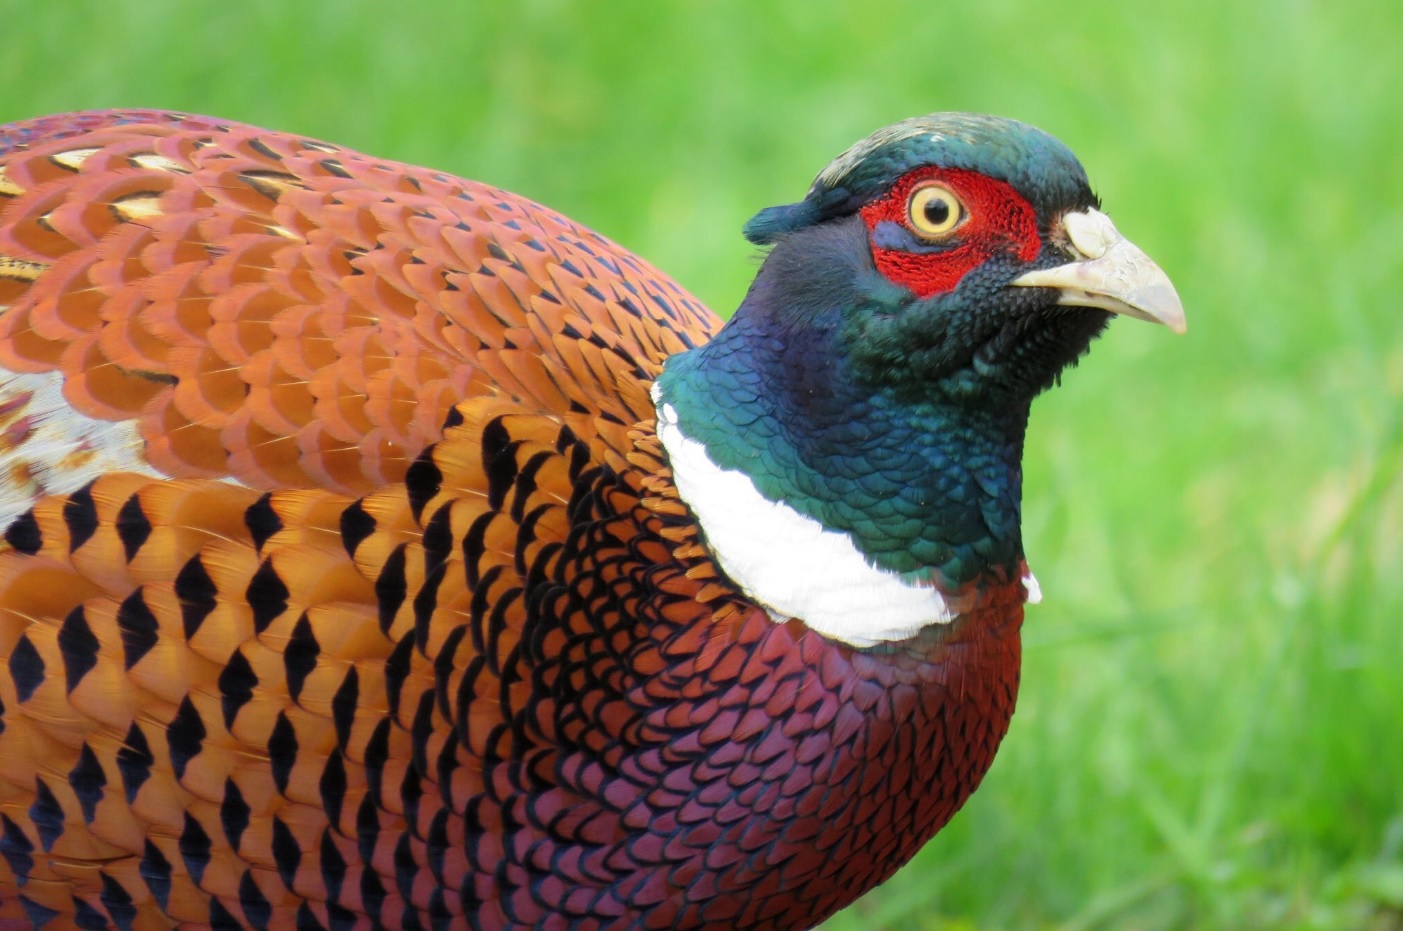 How pheasant hunting can save rural Iowa, farming and the environment